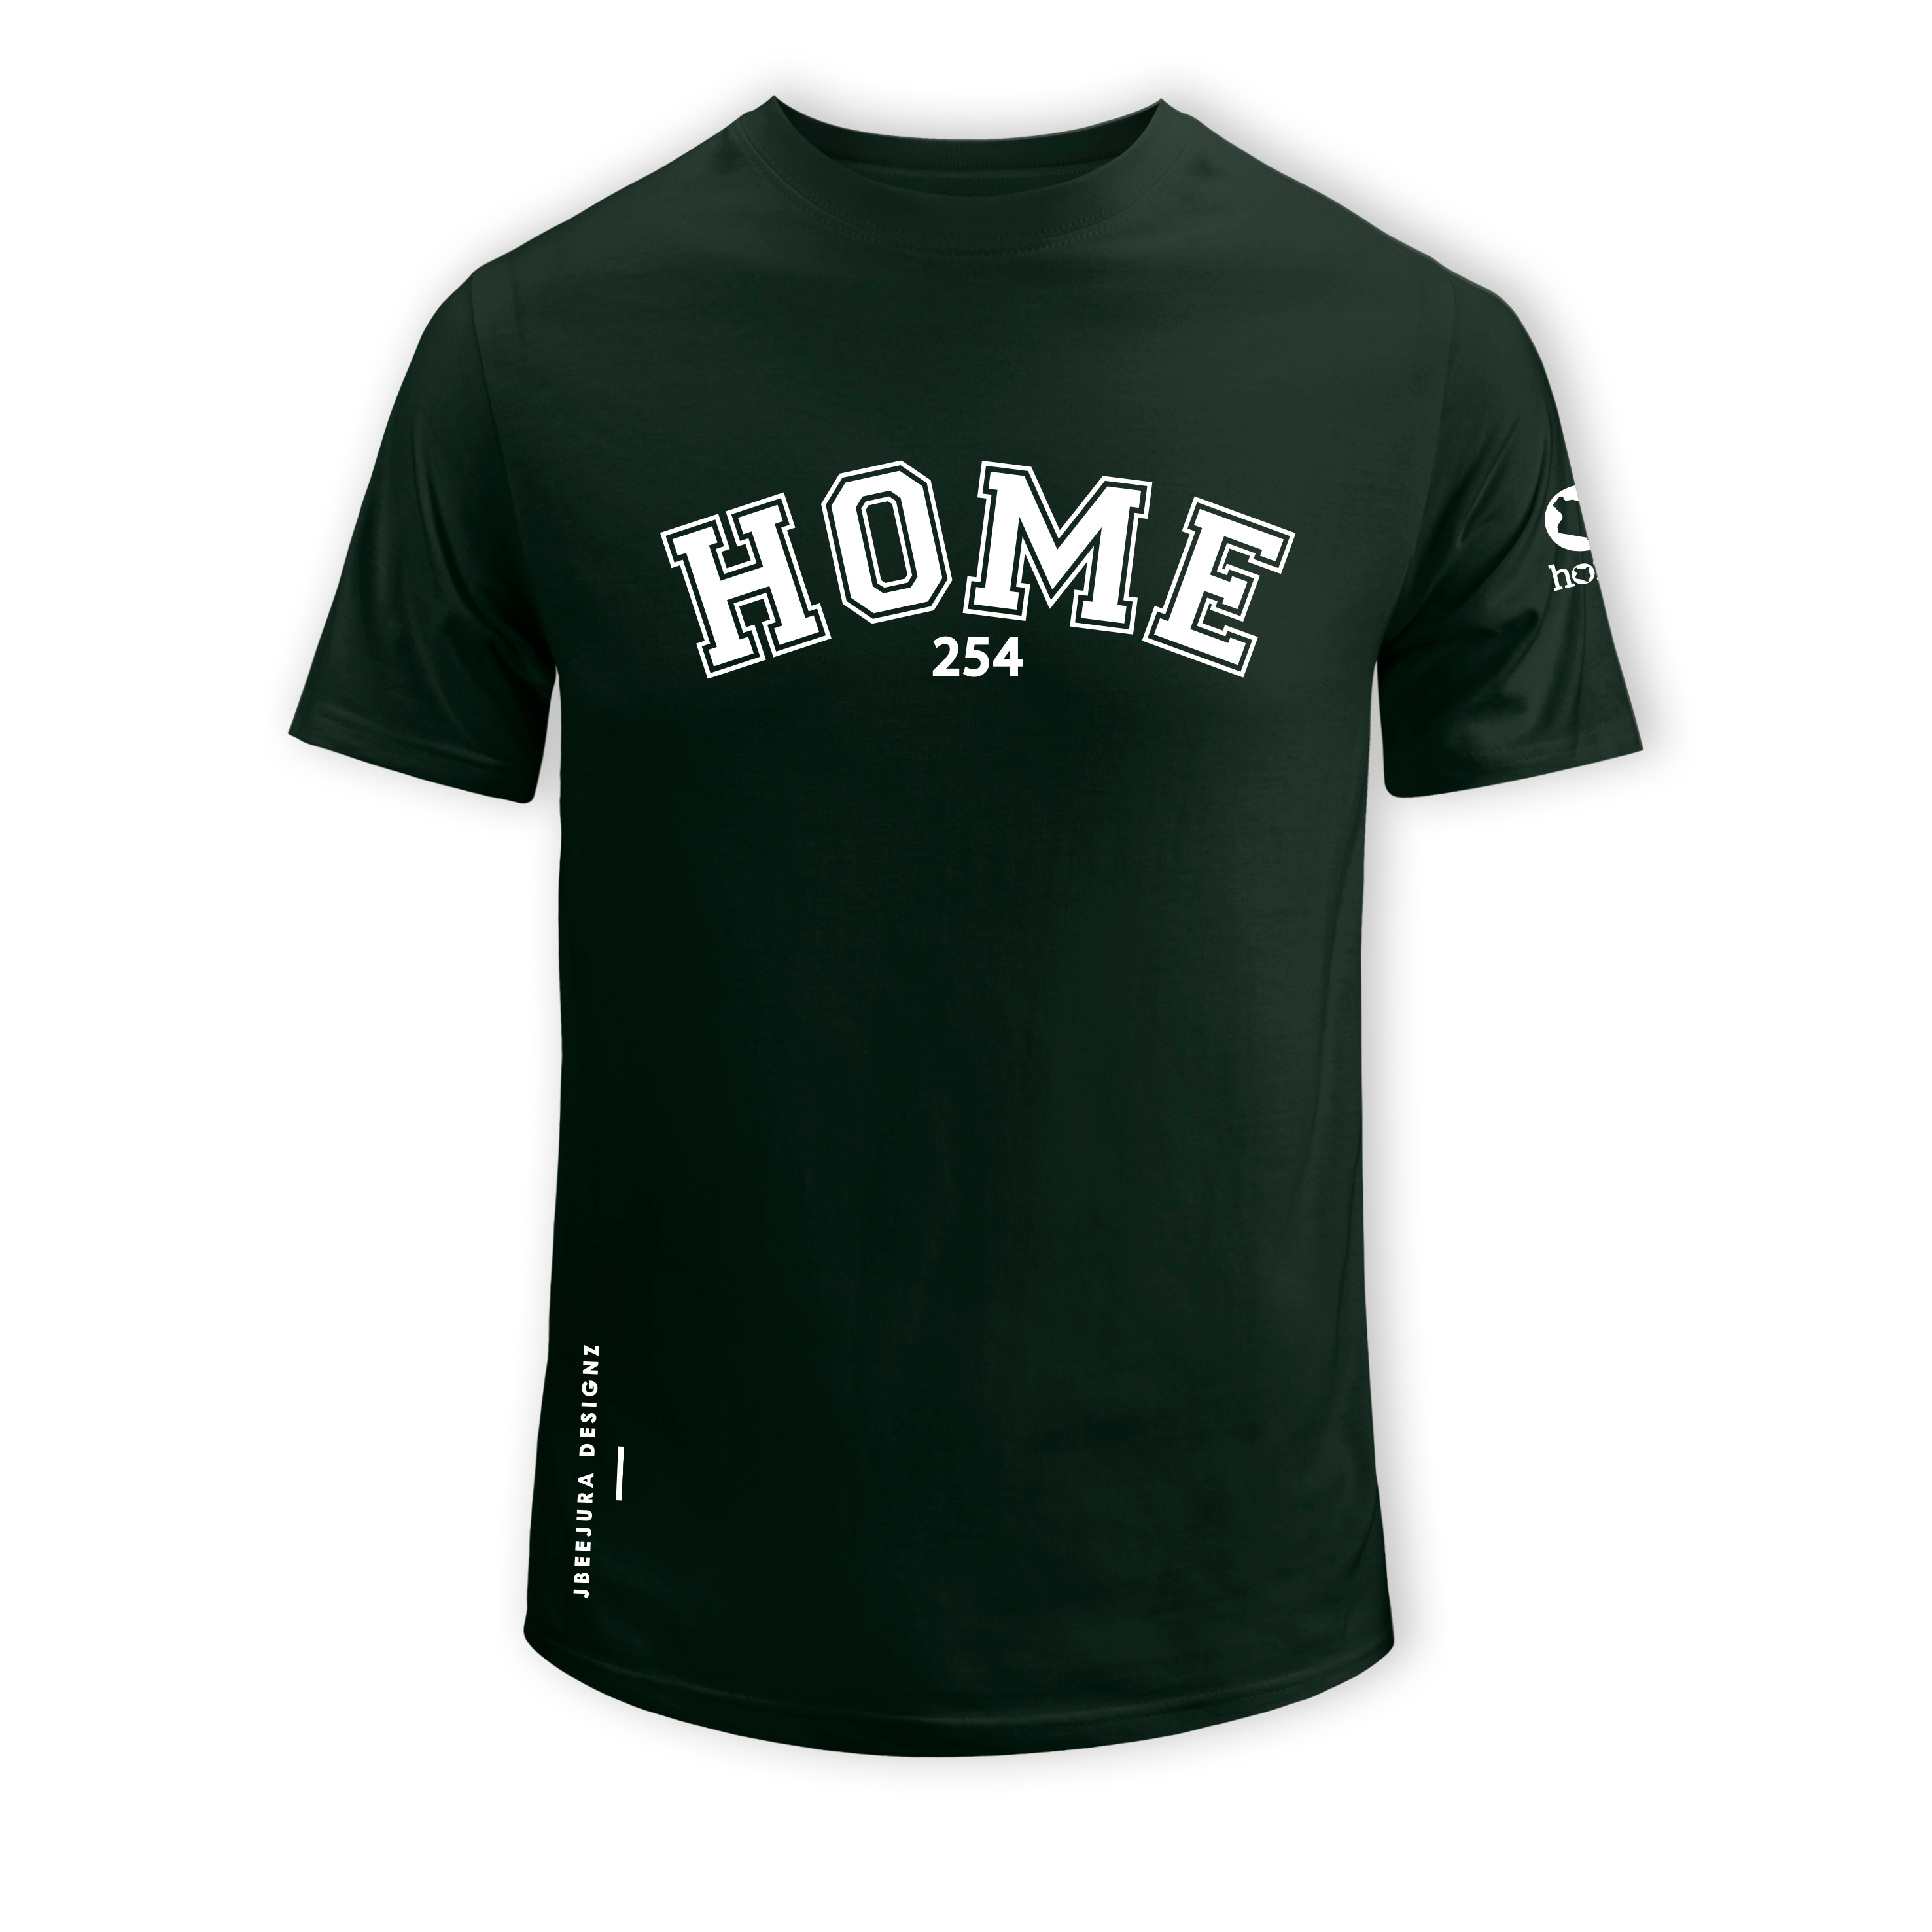  home_254 SHORT-SLEEVED FOREST GREEN T-SHIRT WITH A WHITE COLLEGE PRINT – COTTON PLUS FABRIC